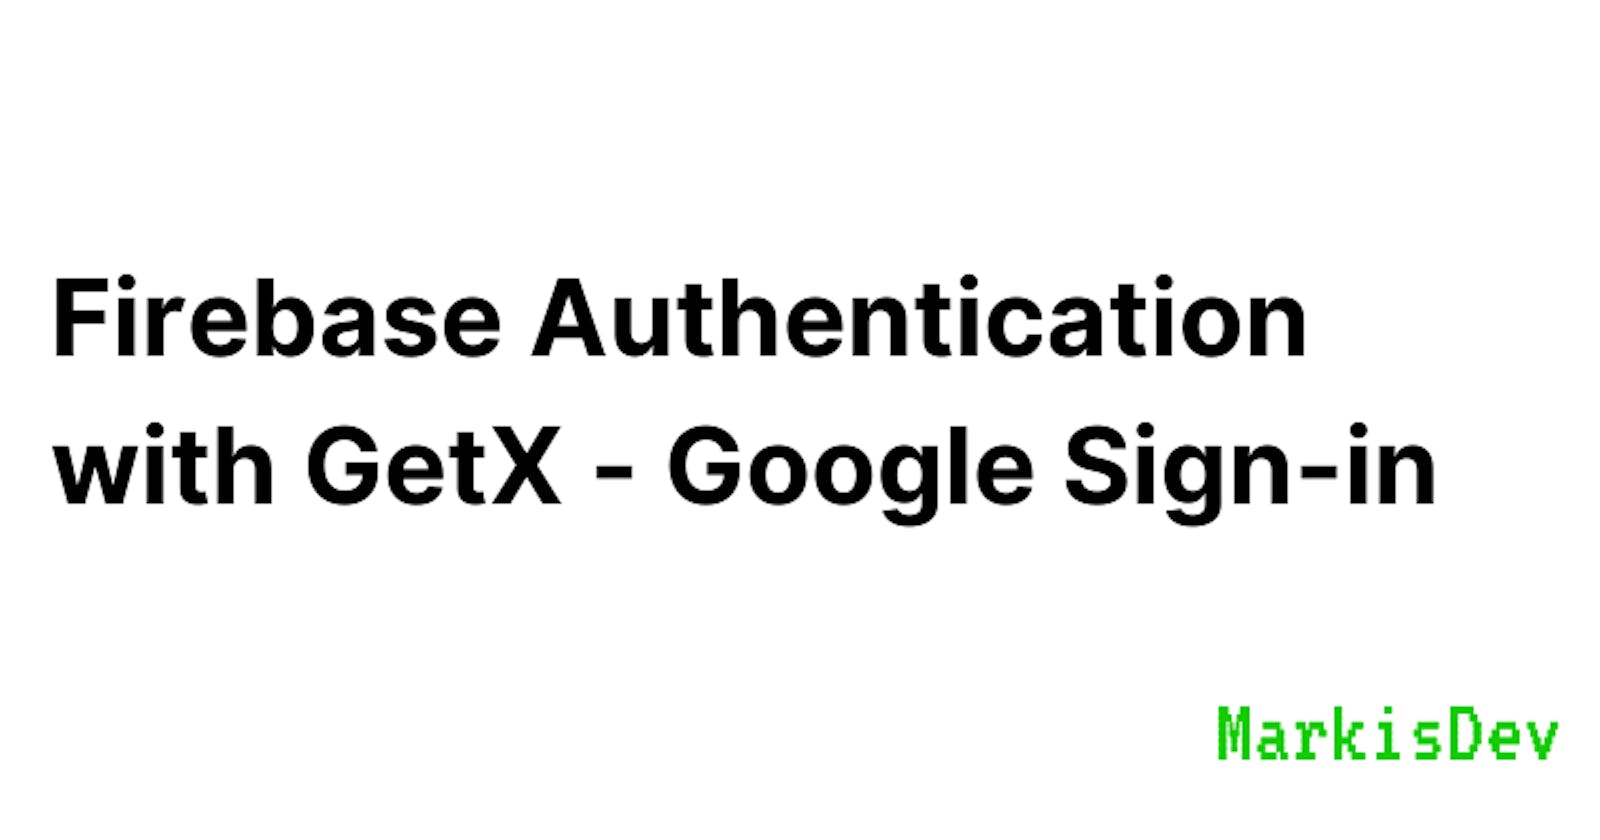 Firebase Authentication with GetX - Google Sign-in